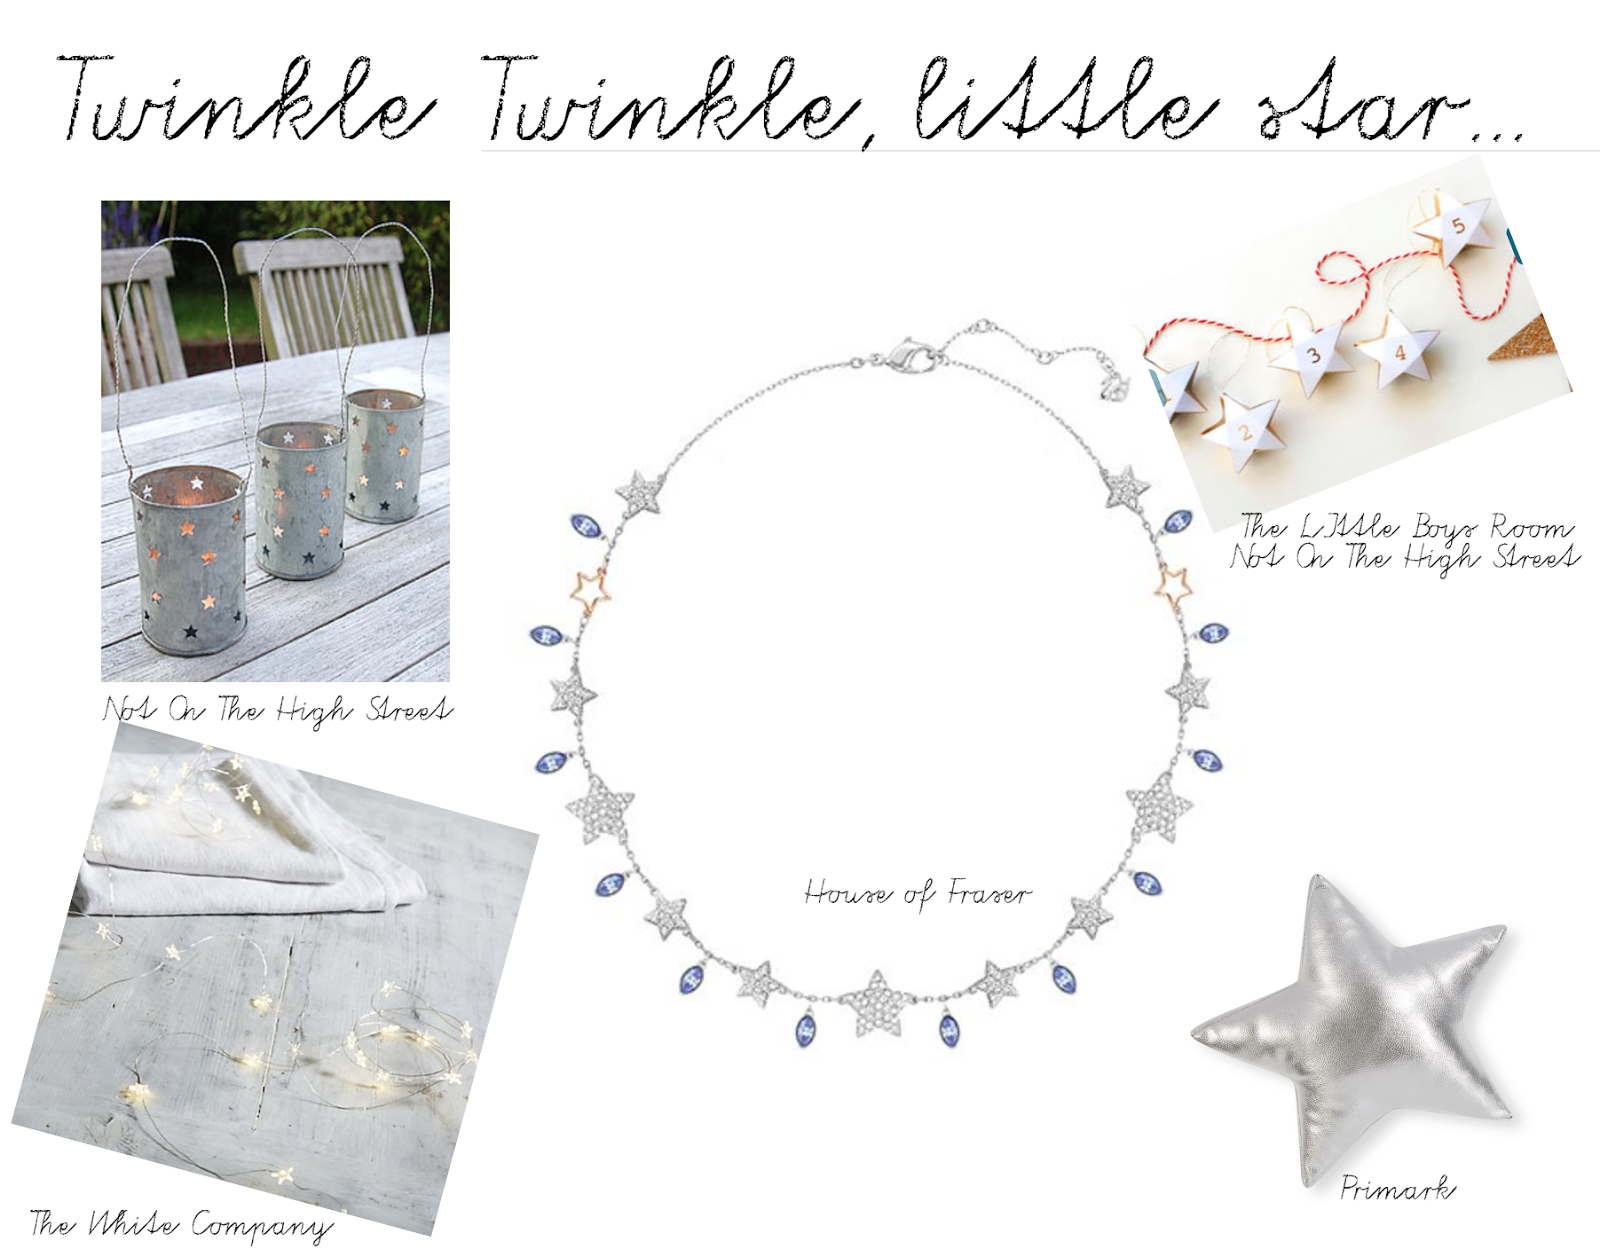 TWINKLE, TWINKLE LITTLE STAR…ON MY CHRISTMAS WISH LIST, YOU ARE